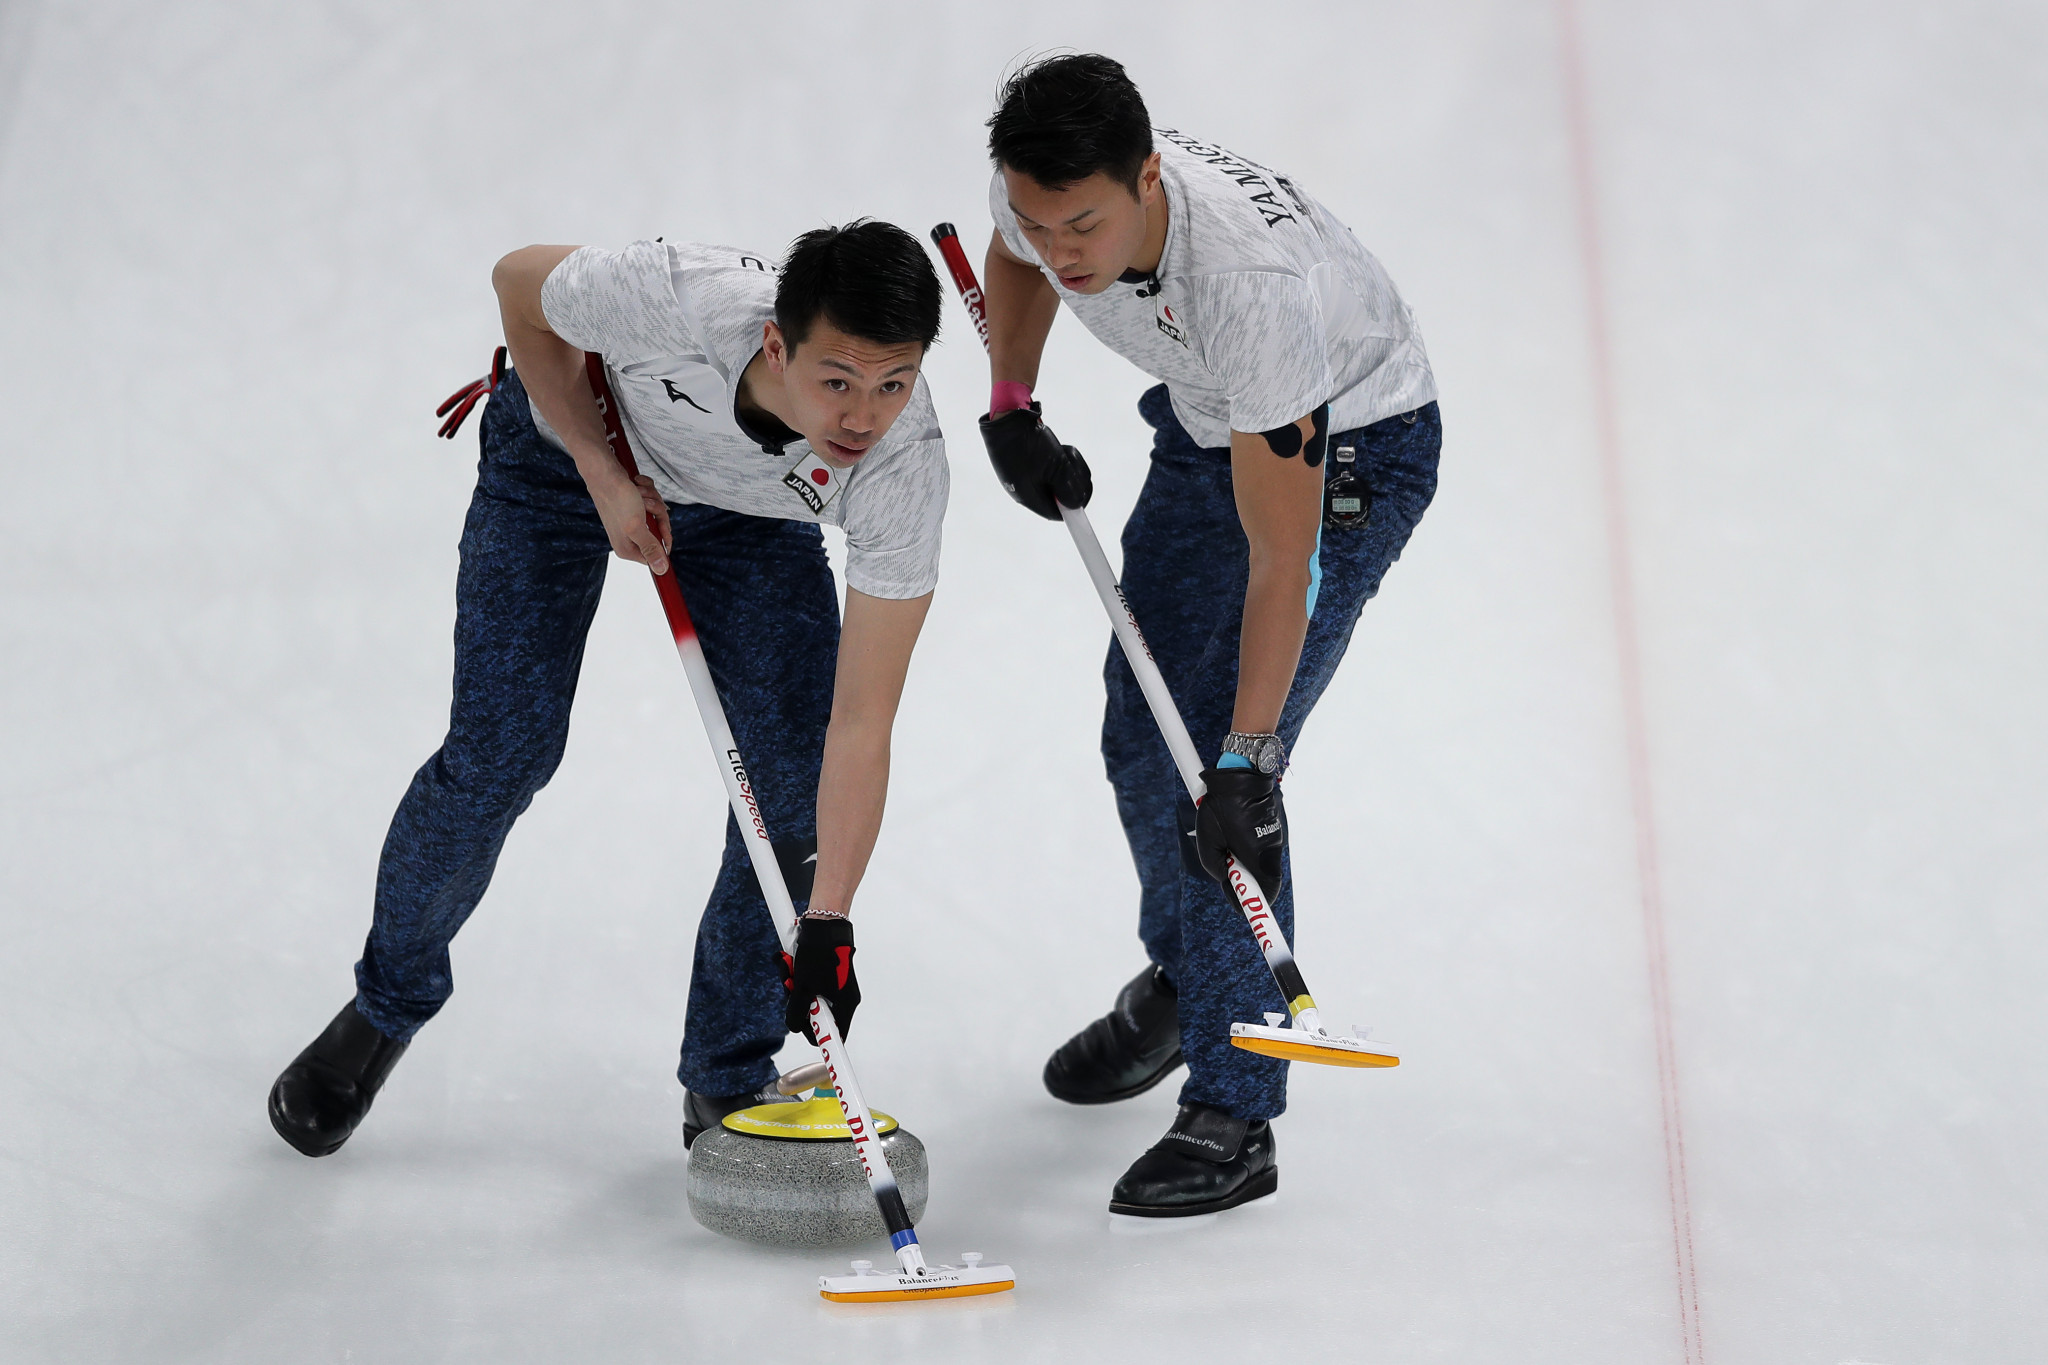 Japan remain undefeated in the Pacific-Asia Curling Championships after its 8-3 victory over Chinese Taipei ©Getty Images